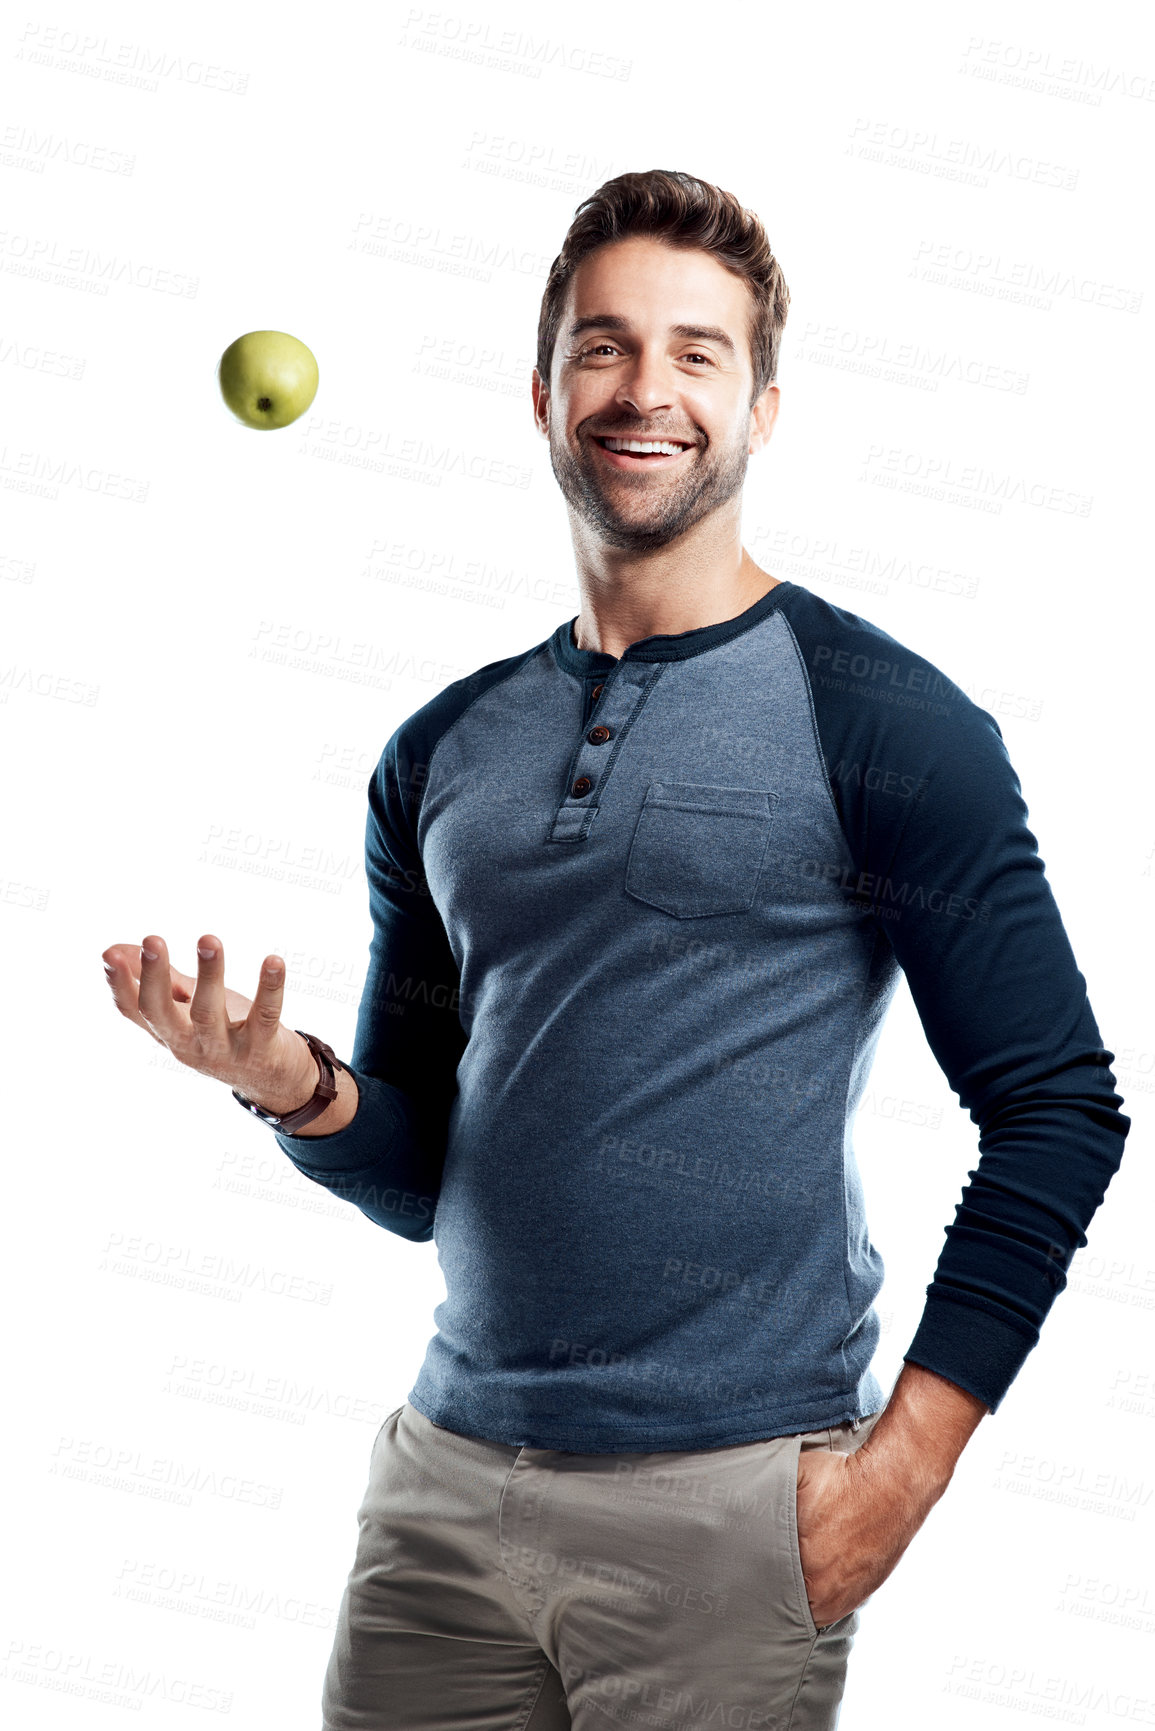 Buy stock photo Studio portrait of a handsome young man tossing an apple against a white background